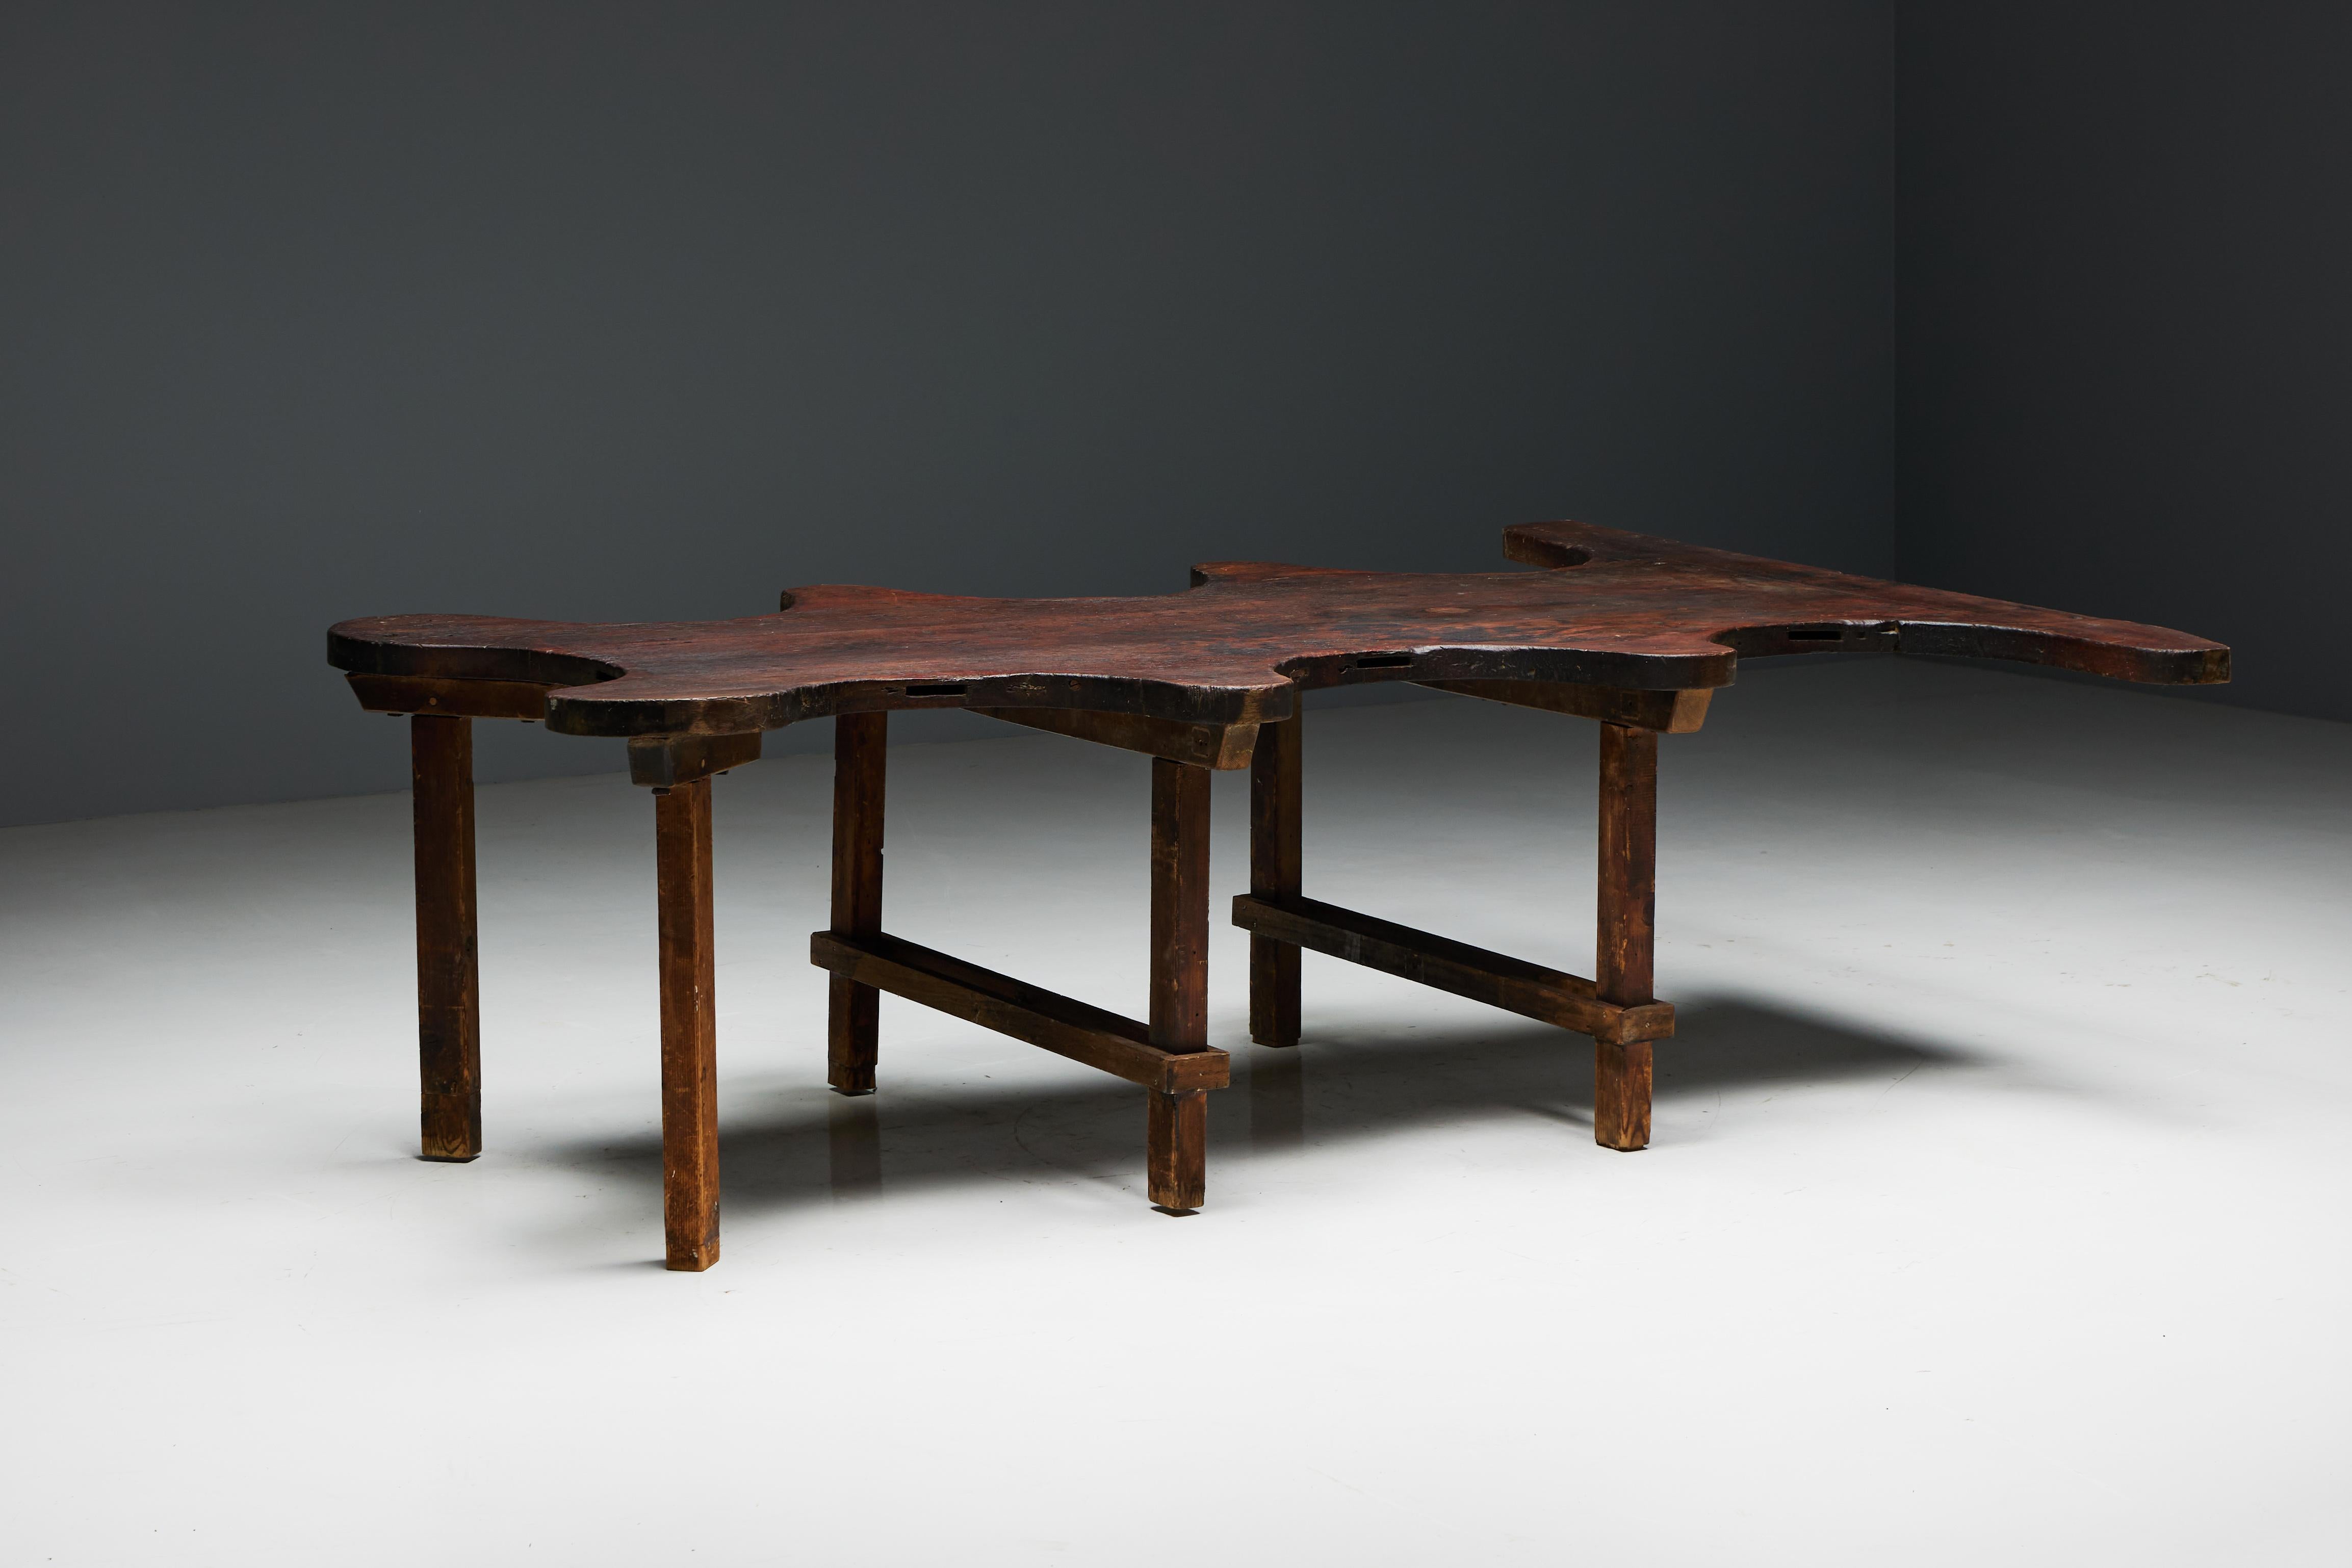 Crafted with meticulous artistry, this free form table, repurposed from a goldsmith atelier, exudes organic charm and rustic elegance. Its sturdy oak wood bears the marks of time, a testament to its rich history. With ample space to accommodate up